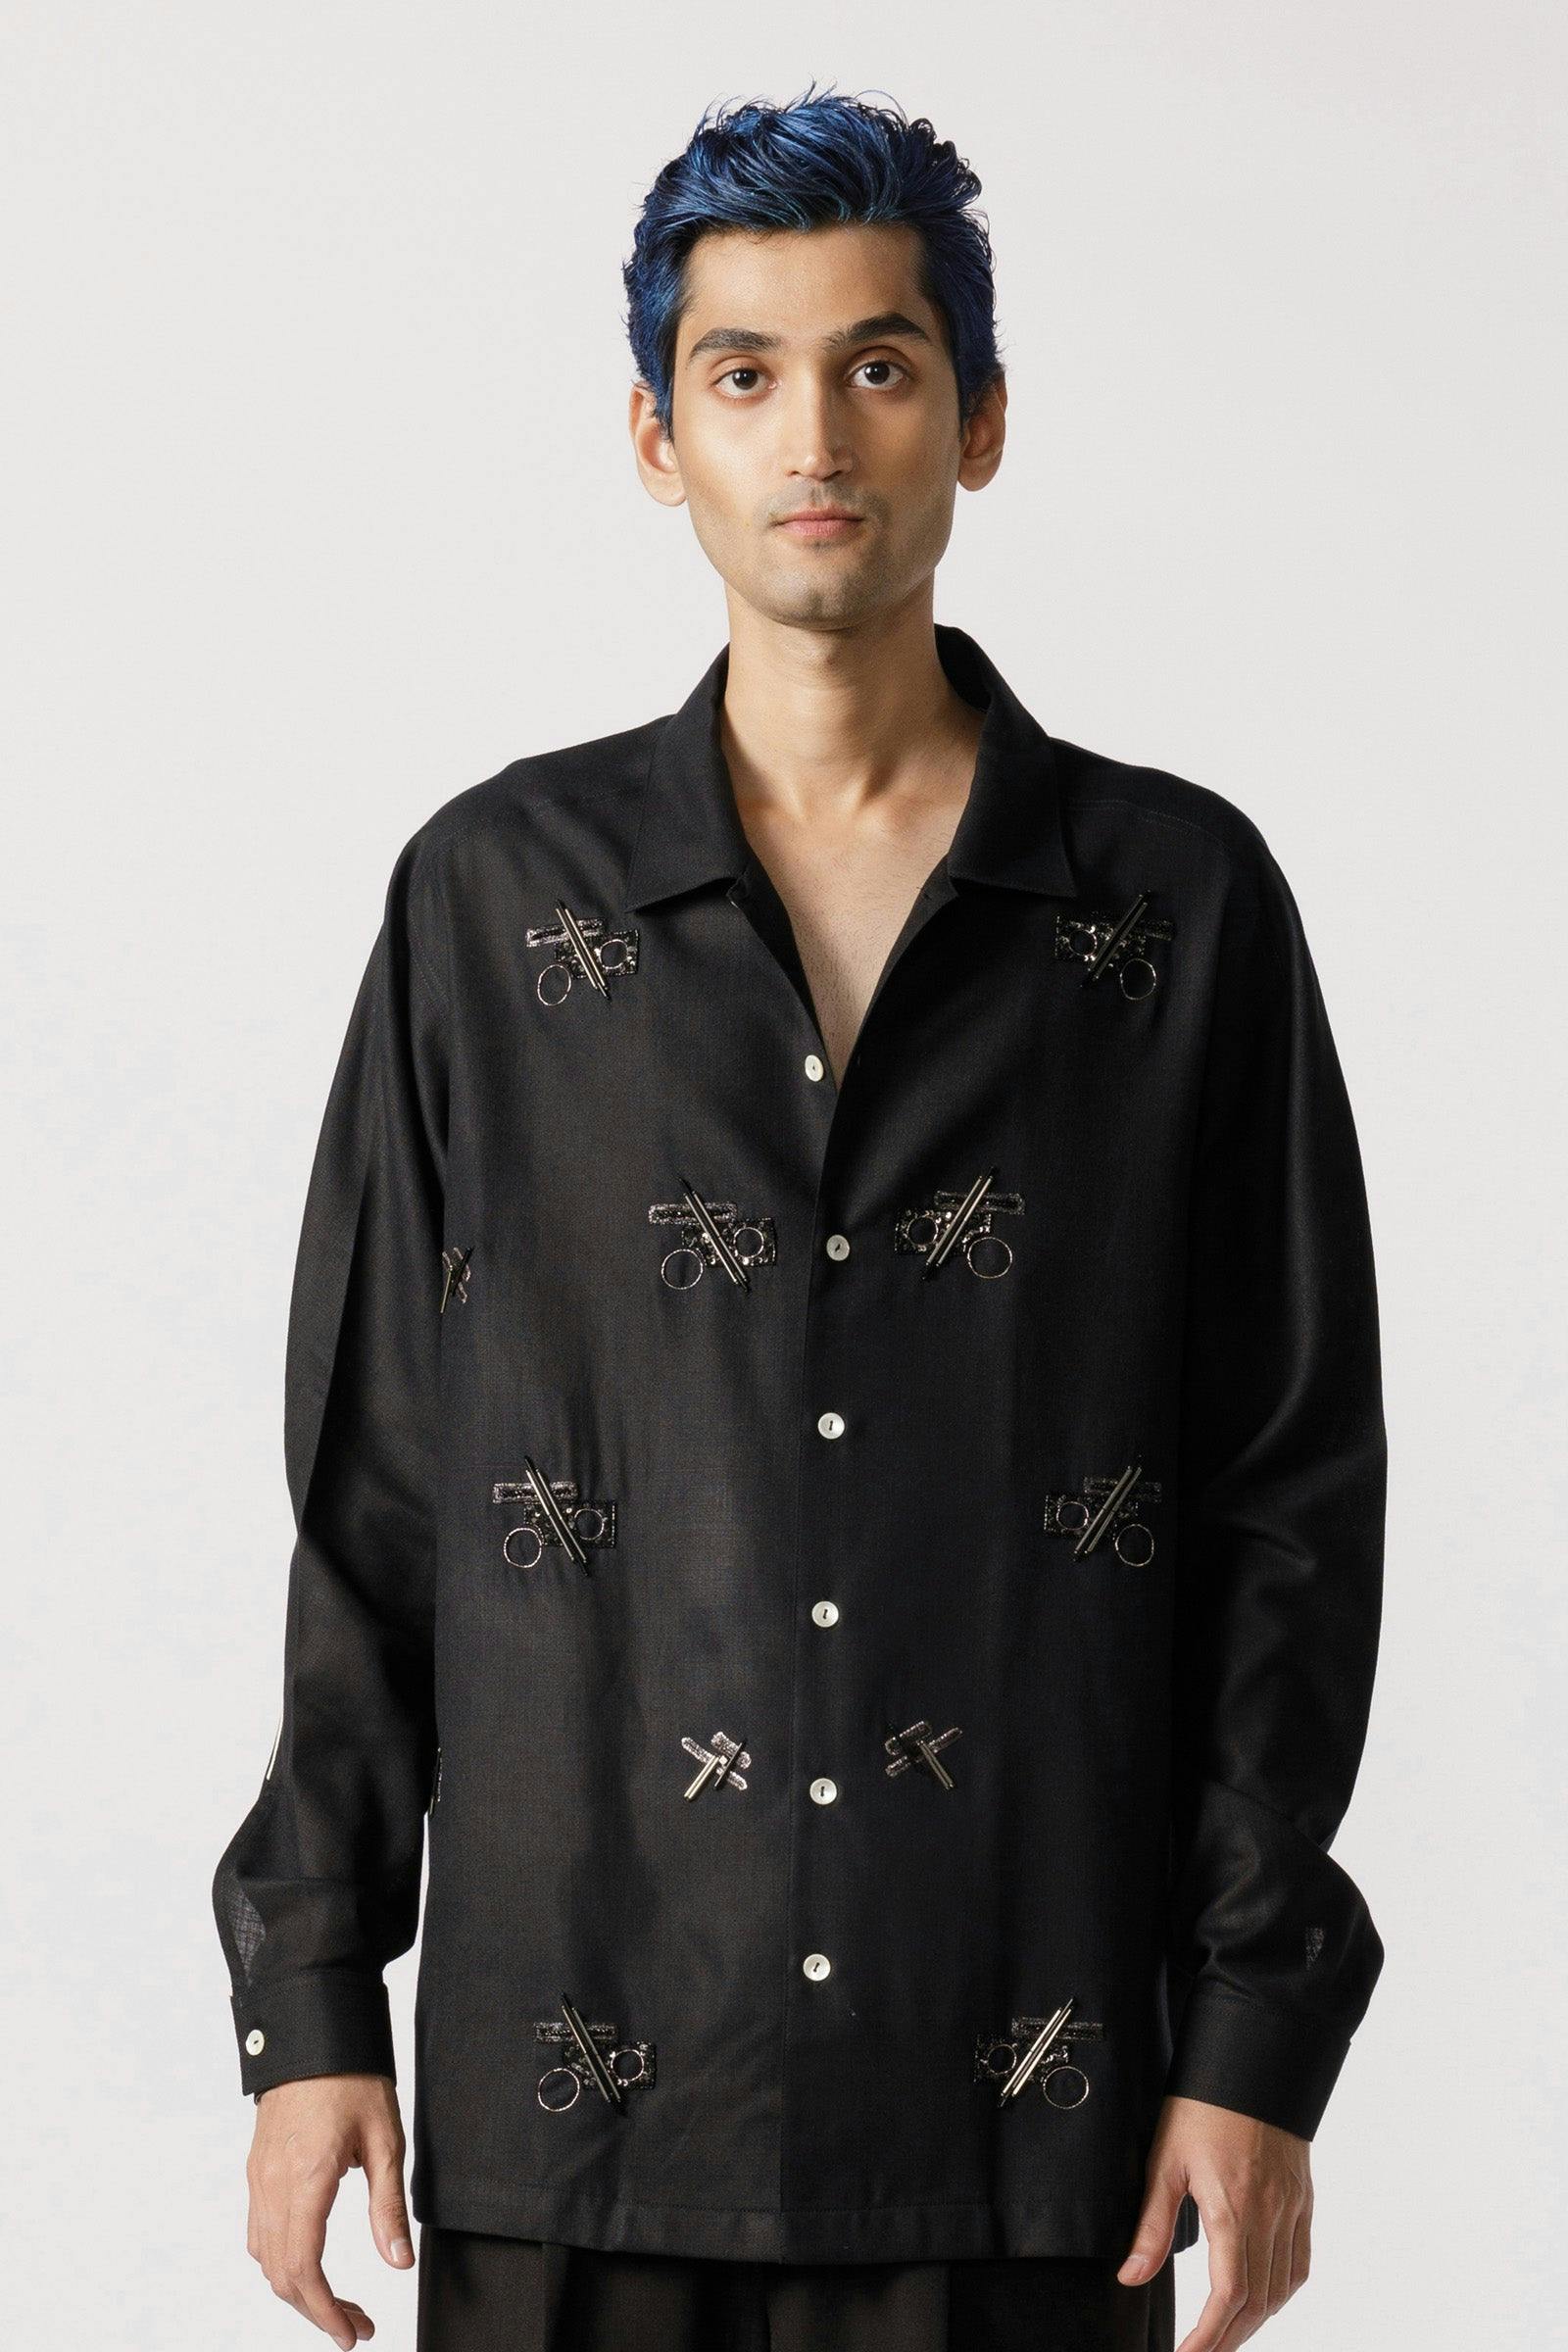 Oversized embroidered shirt(black), a product by Line Outline